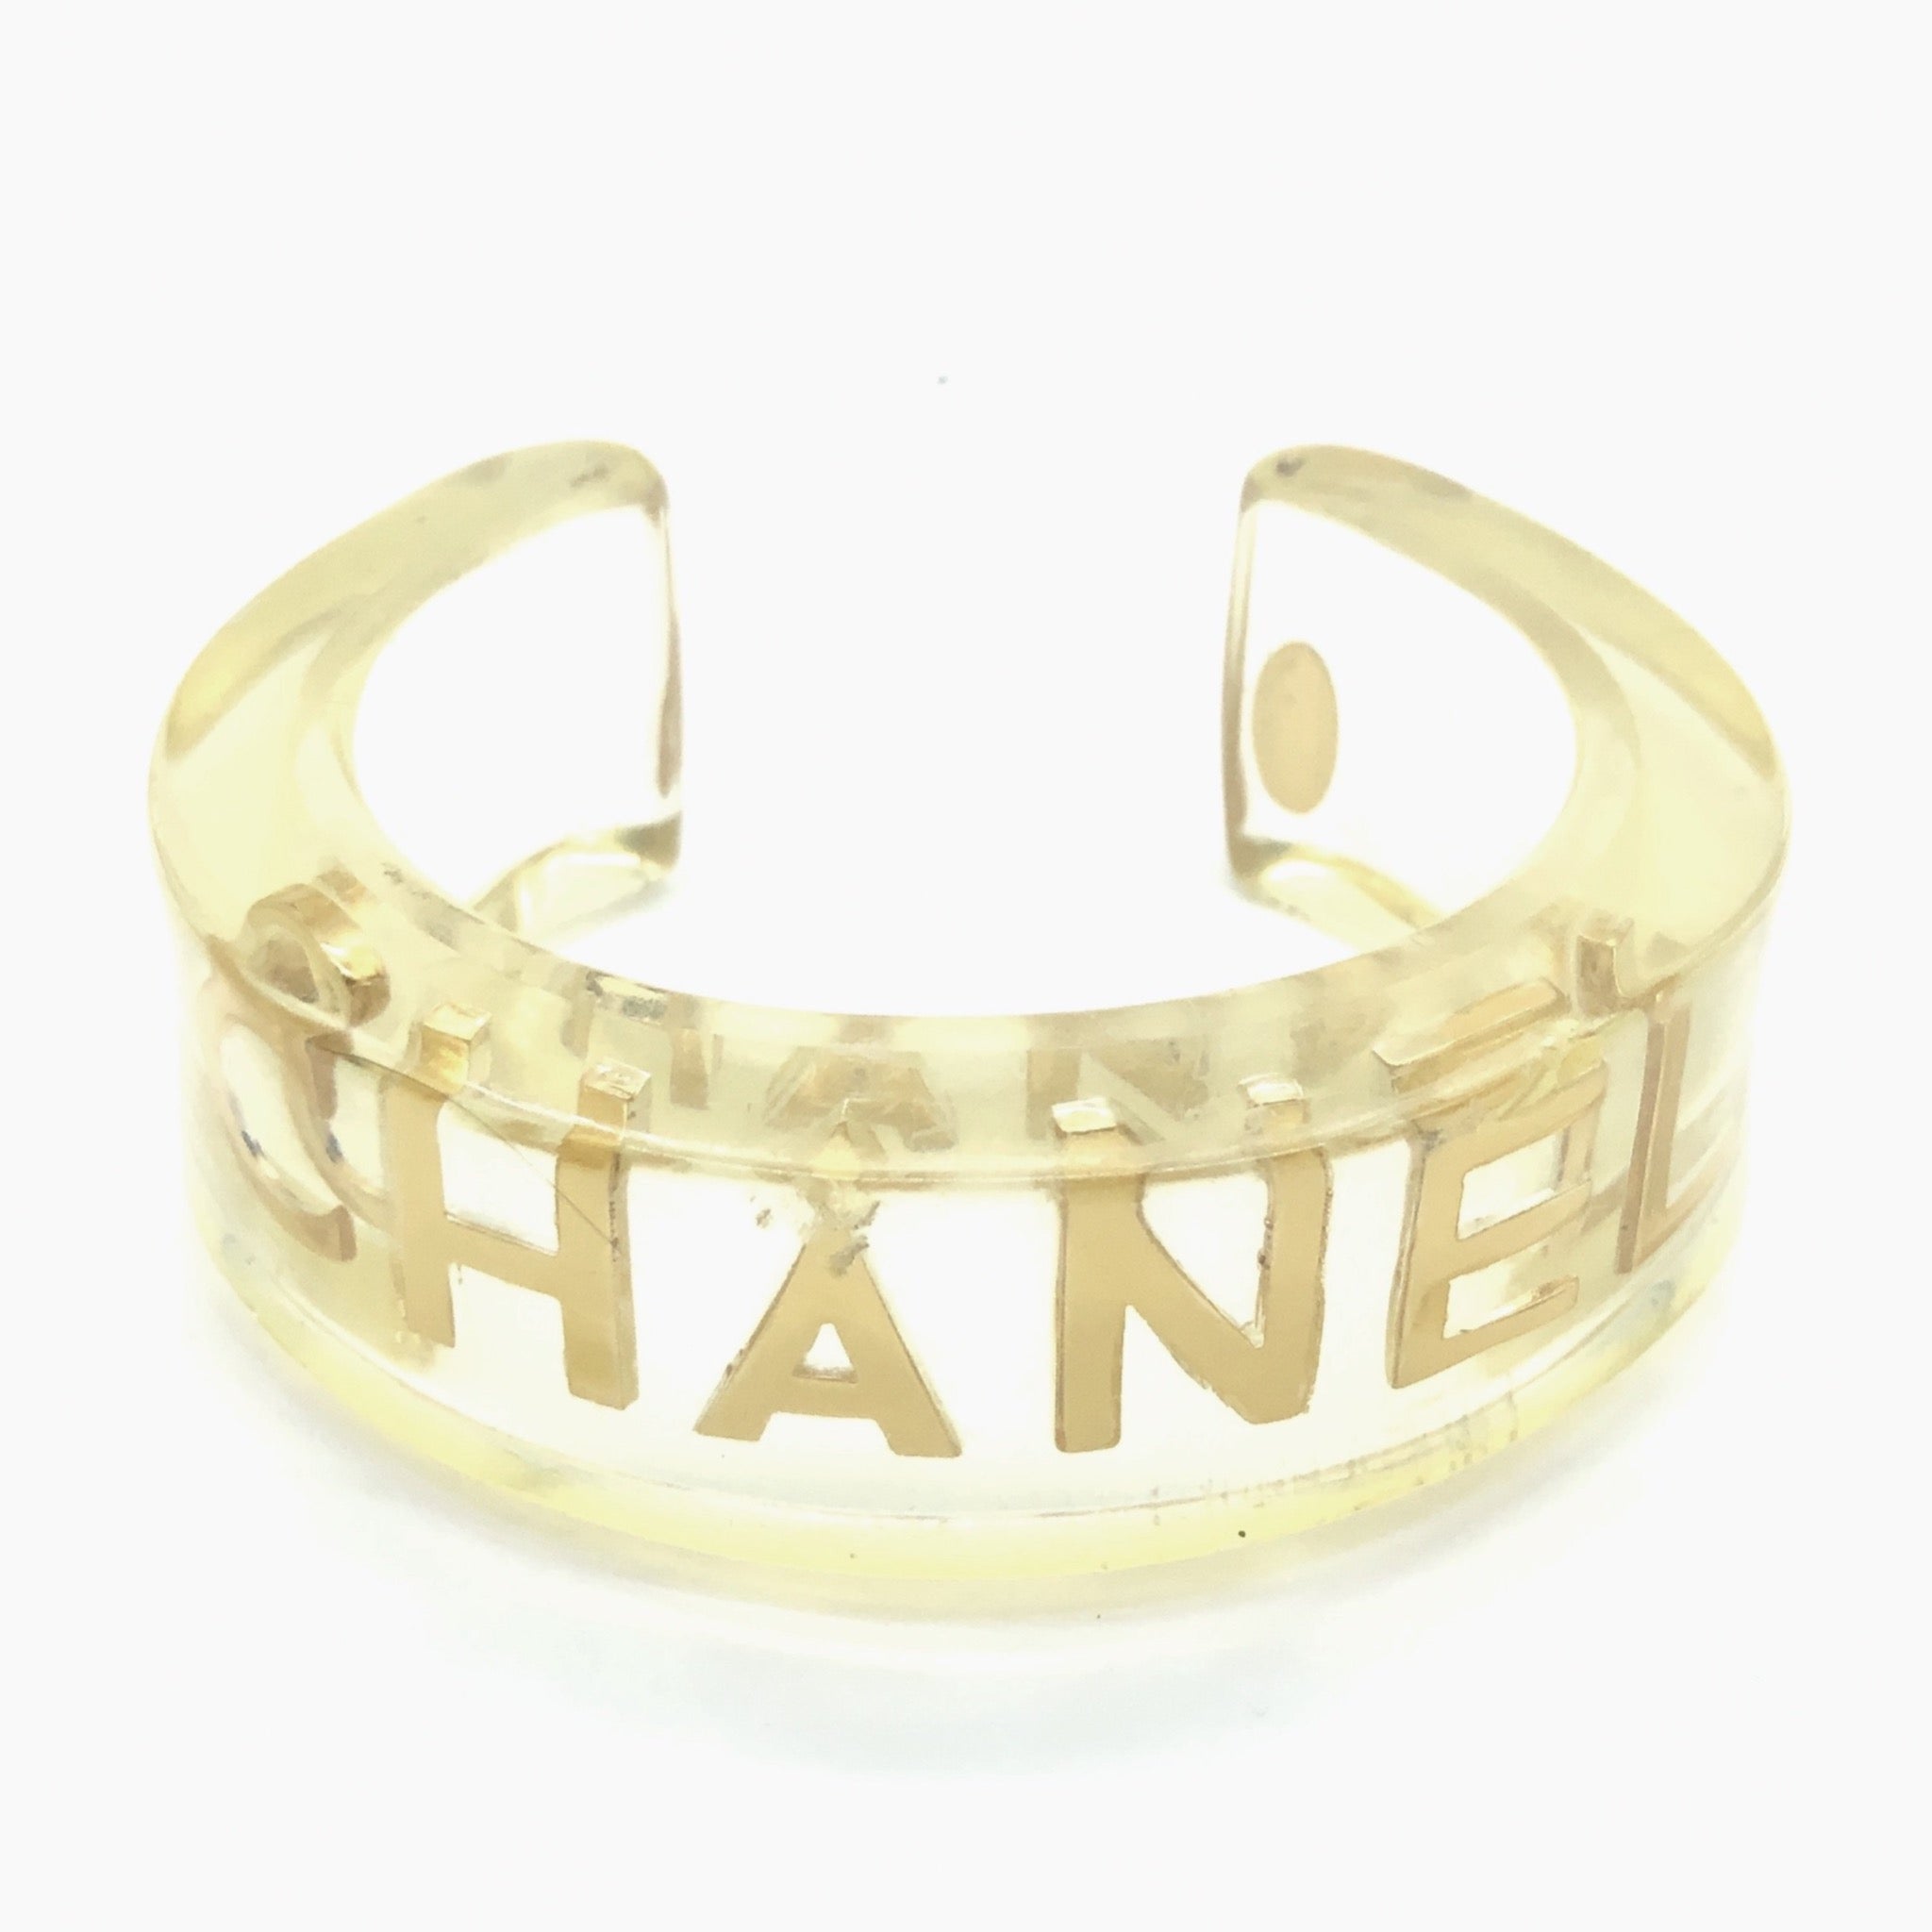 Vintage Chanel Lucite Cuff with CHANEL in Gold – Very Vintage